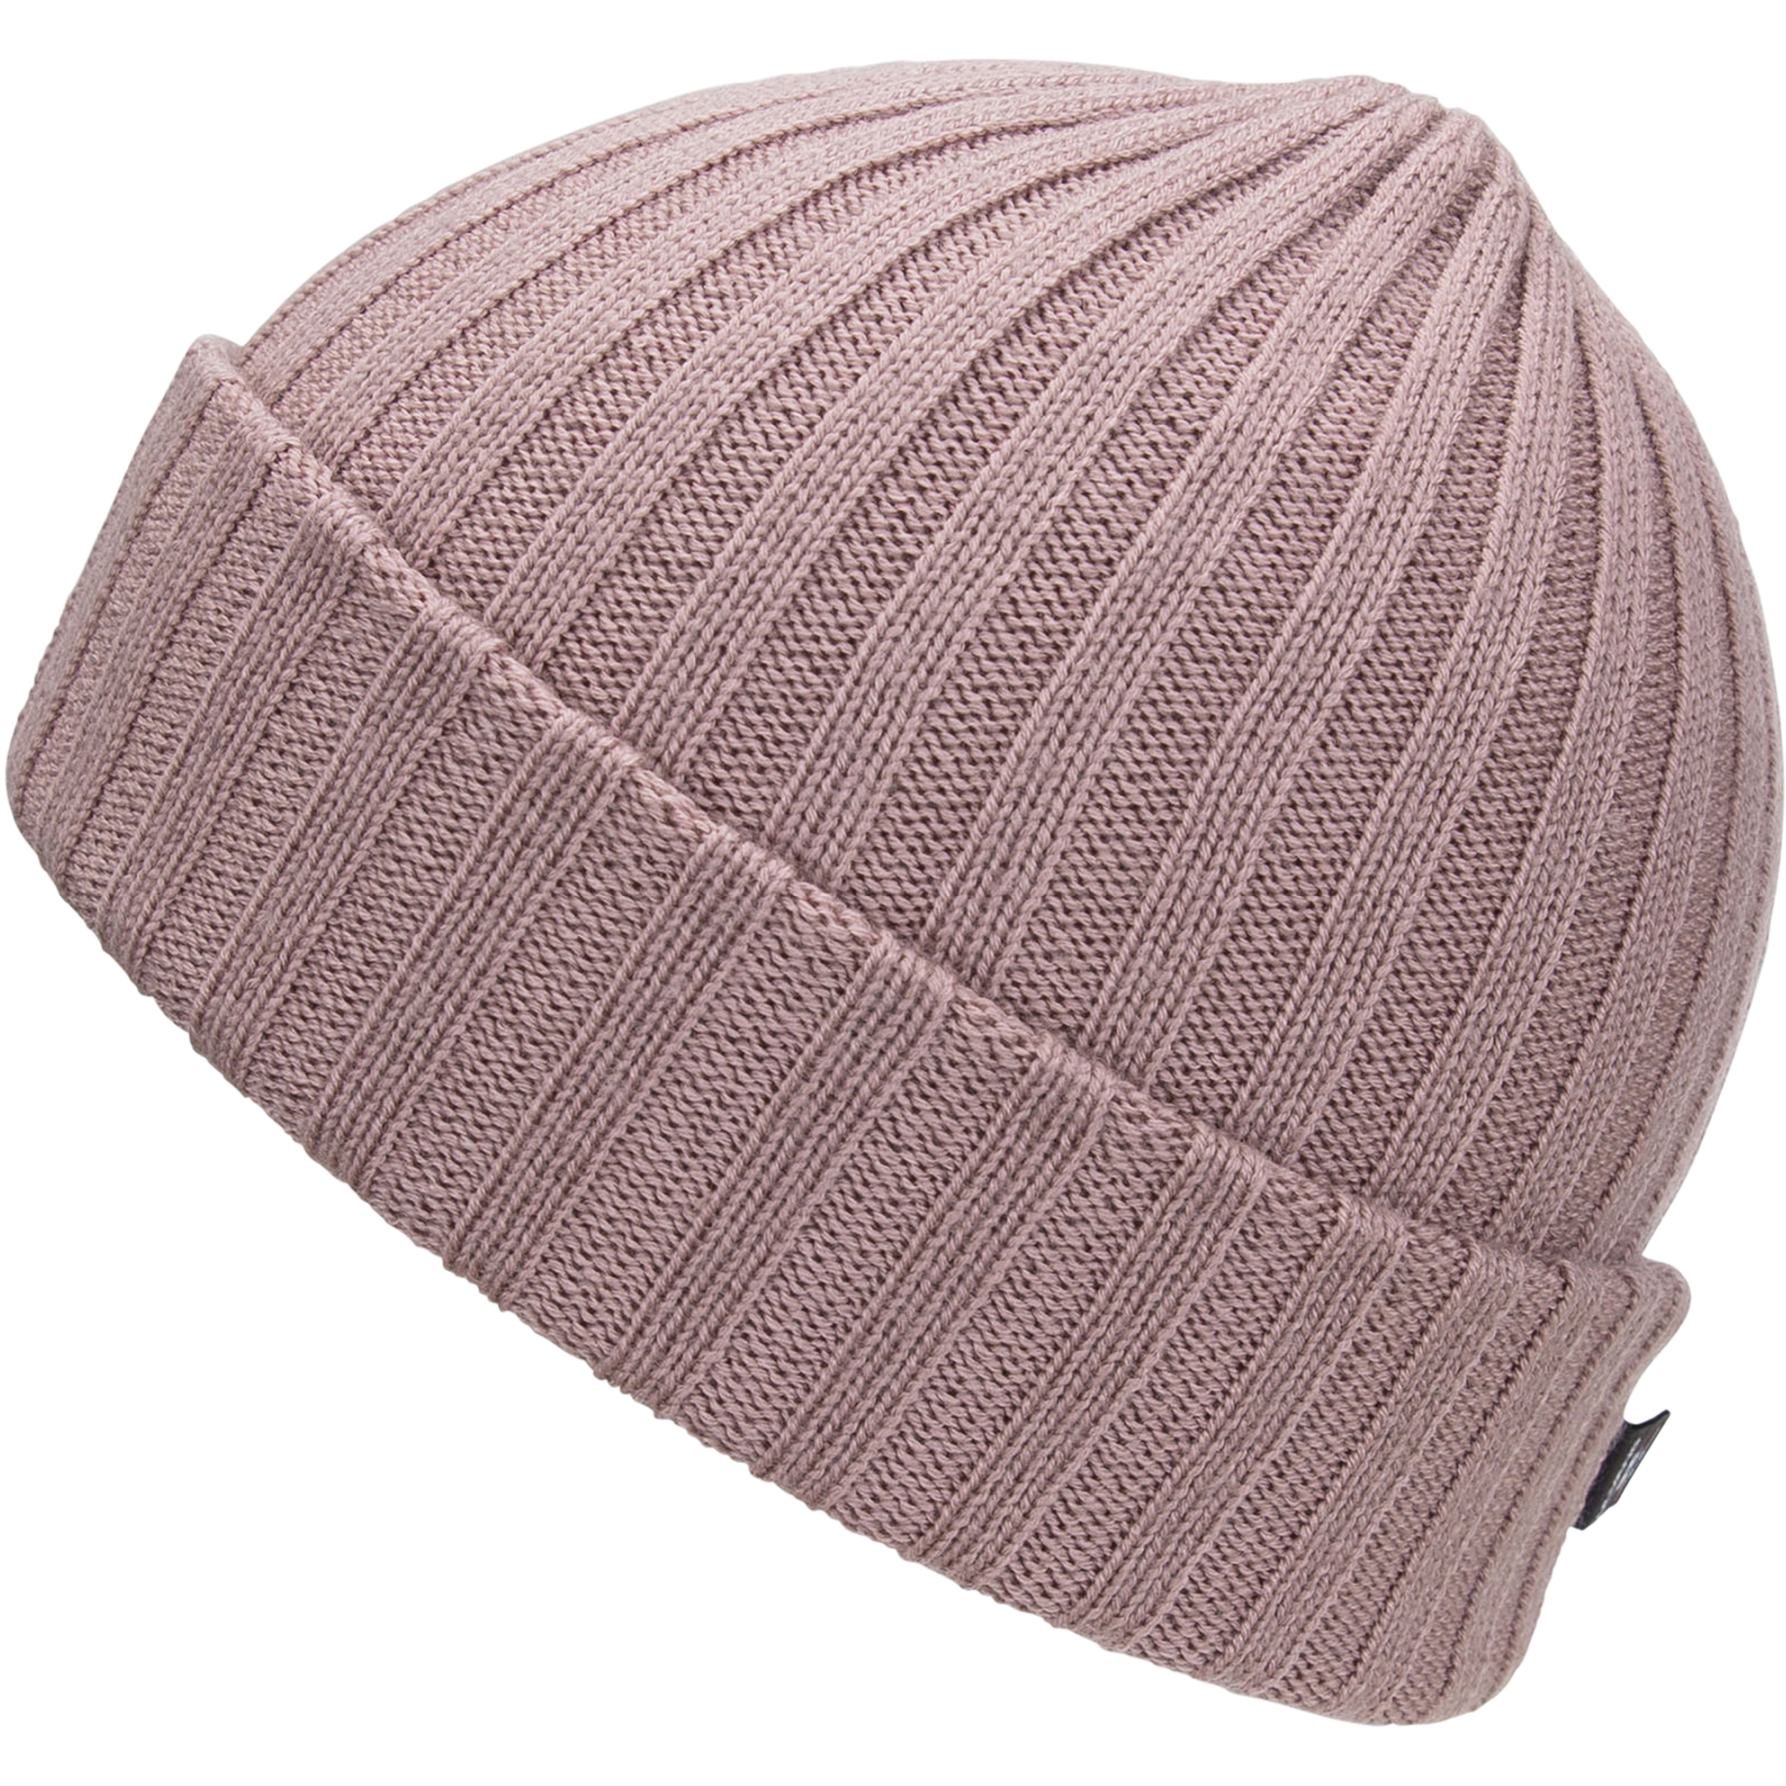 Picture of Ulvang Rondane Hat - Woodrose